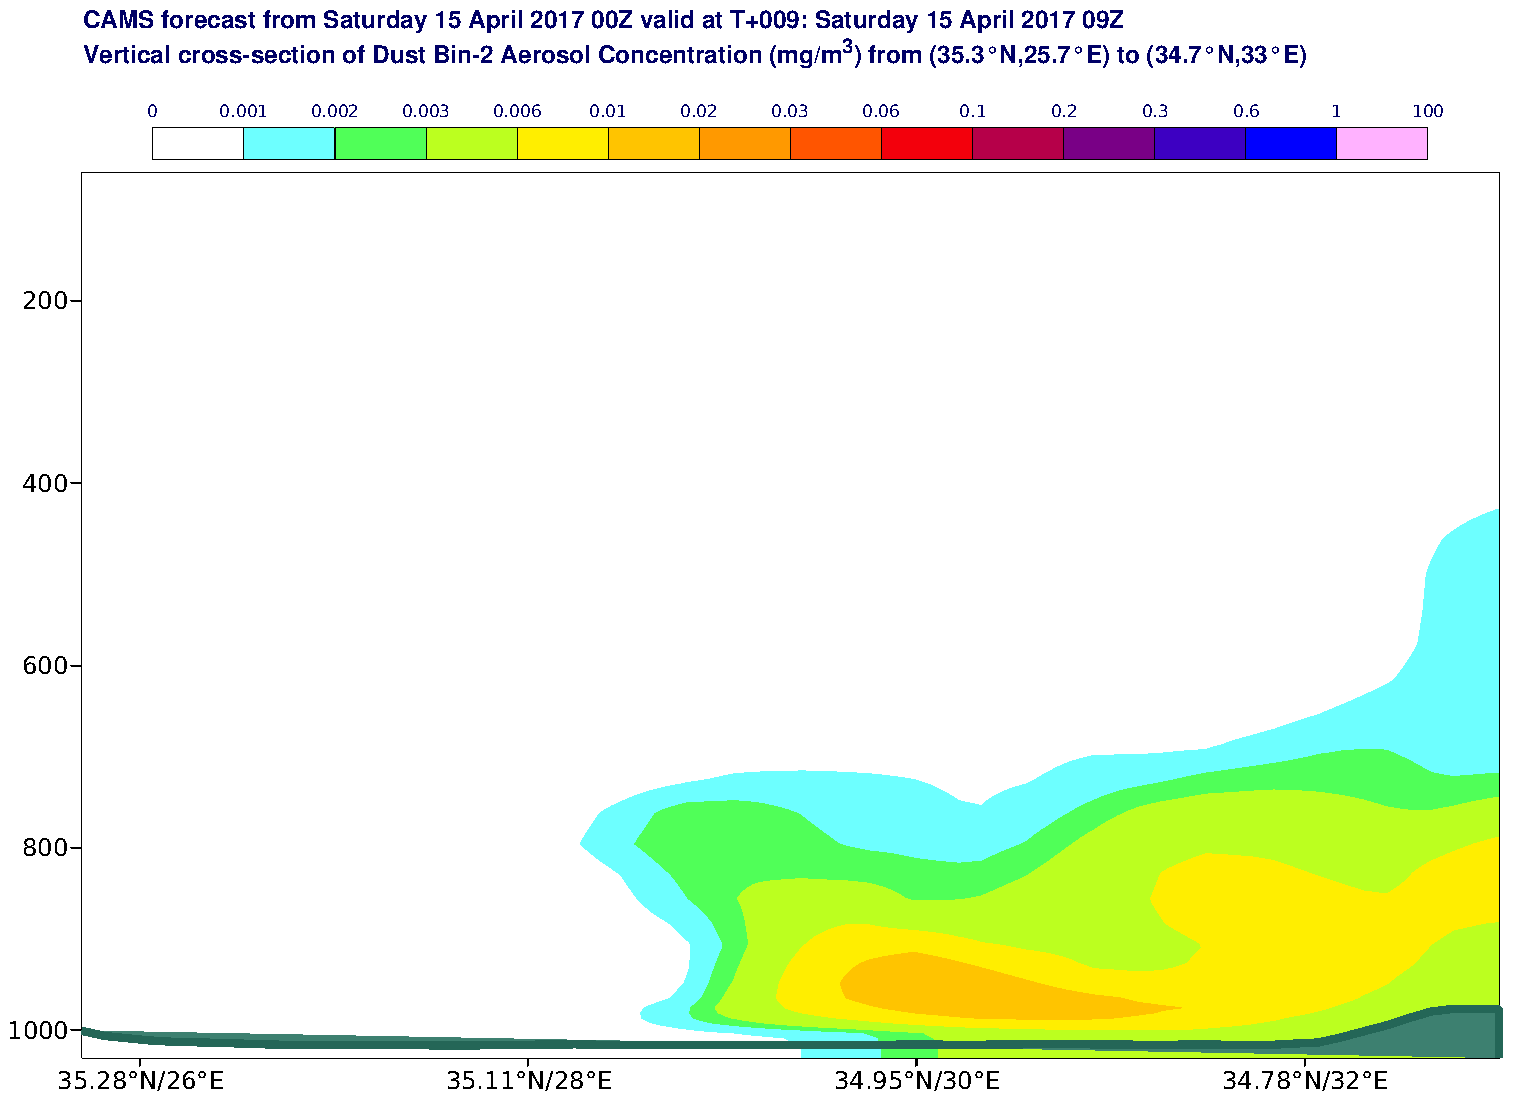 Vertical cross-section of Dust Bin-2 Aerosol Concentration (mg/m3) valid at T9 - 2017-04-15 09:00